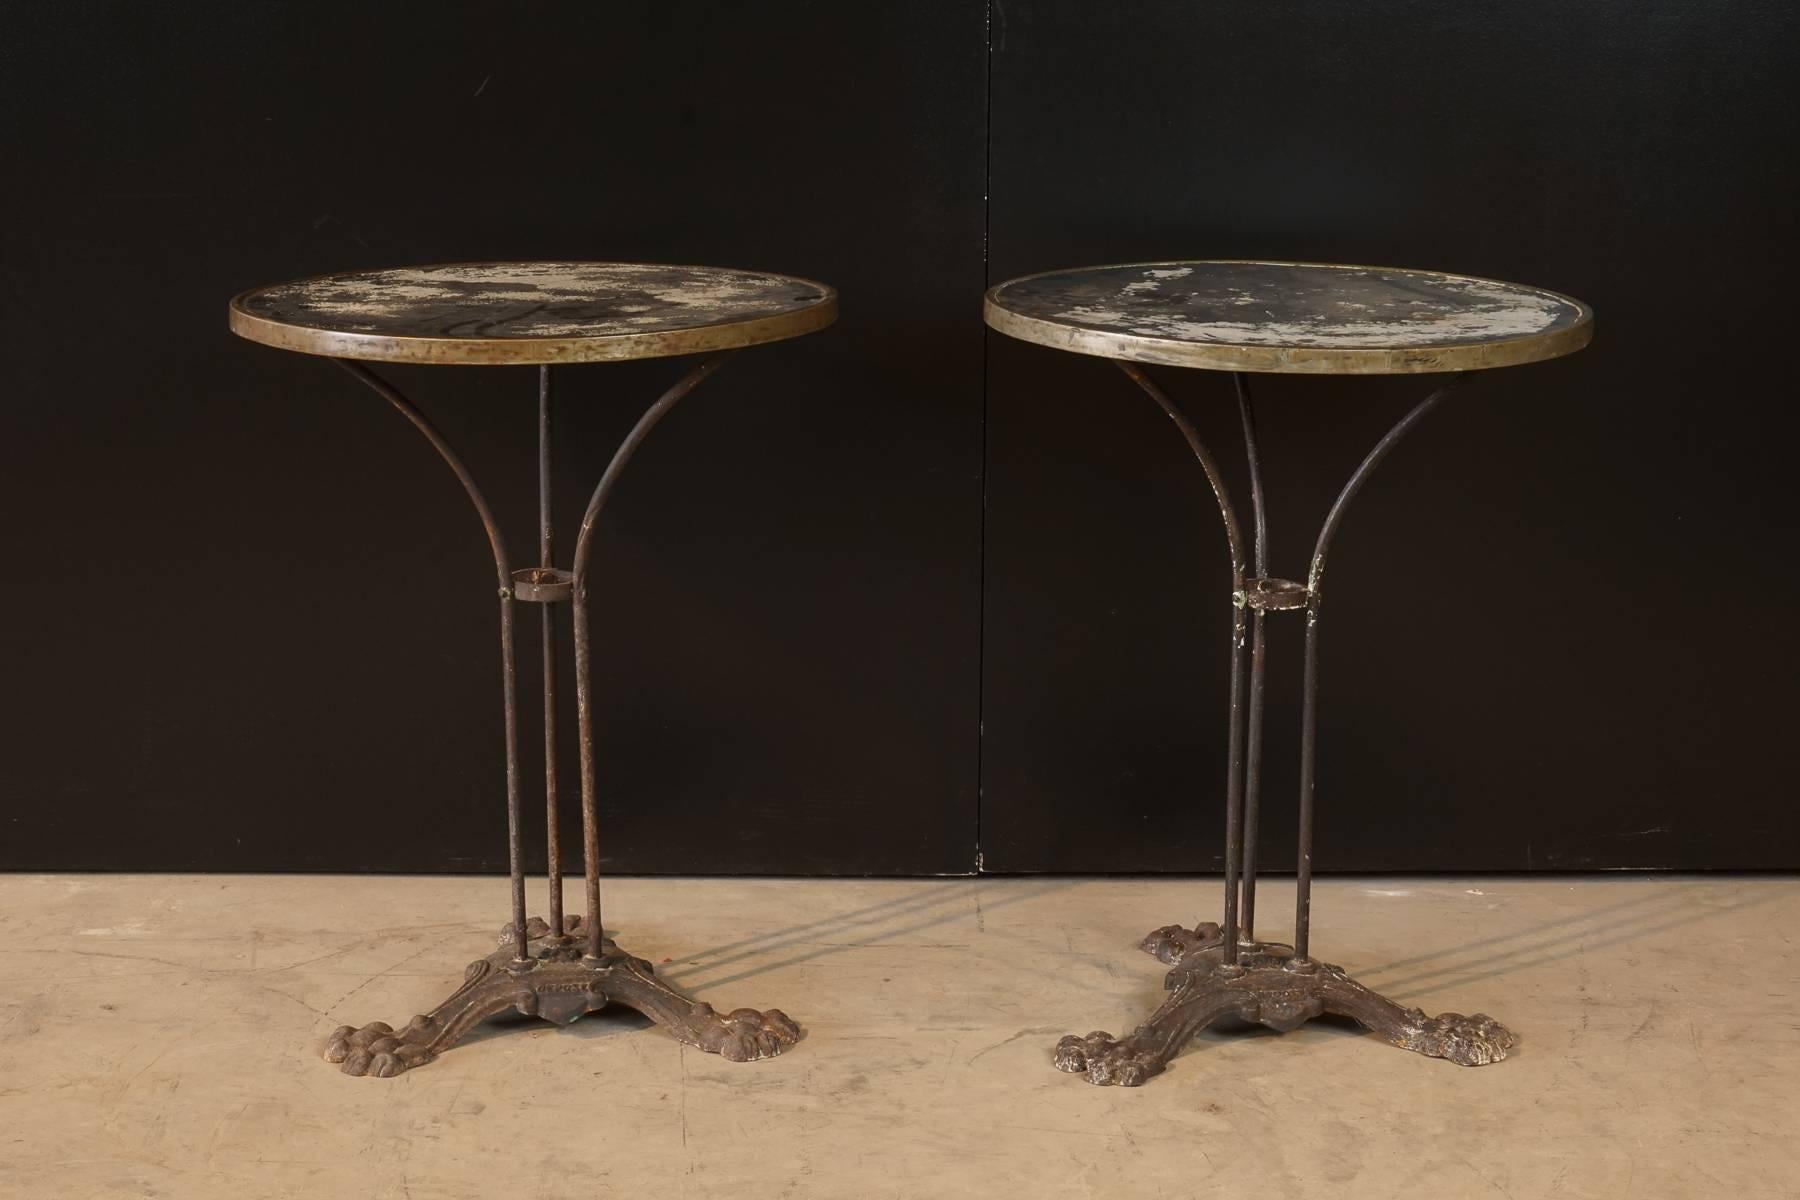 Pair of French Bistro Tables, circa 1930. Iron base with claw foot detail and marked "Depose." Metal top with brass edge.